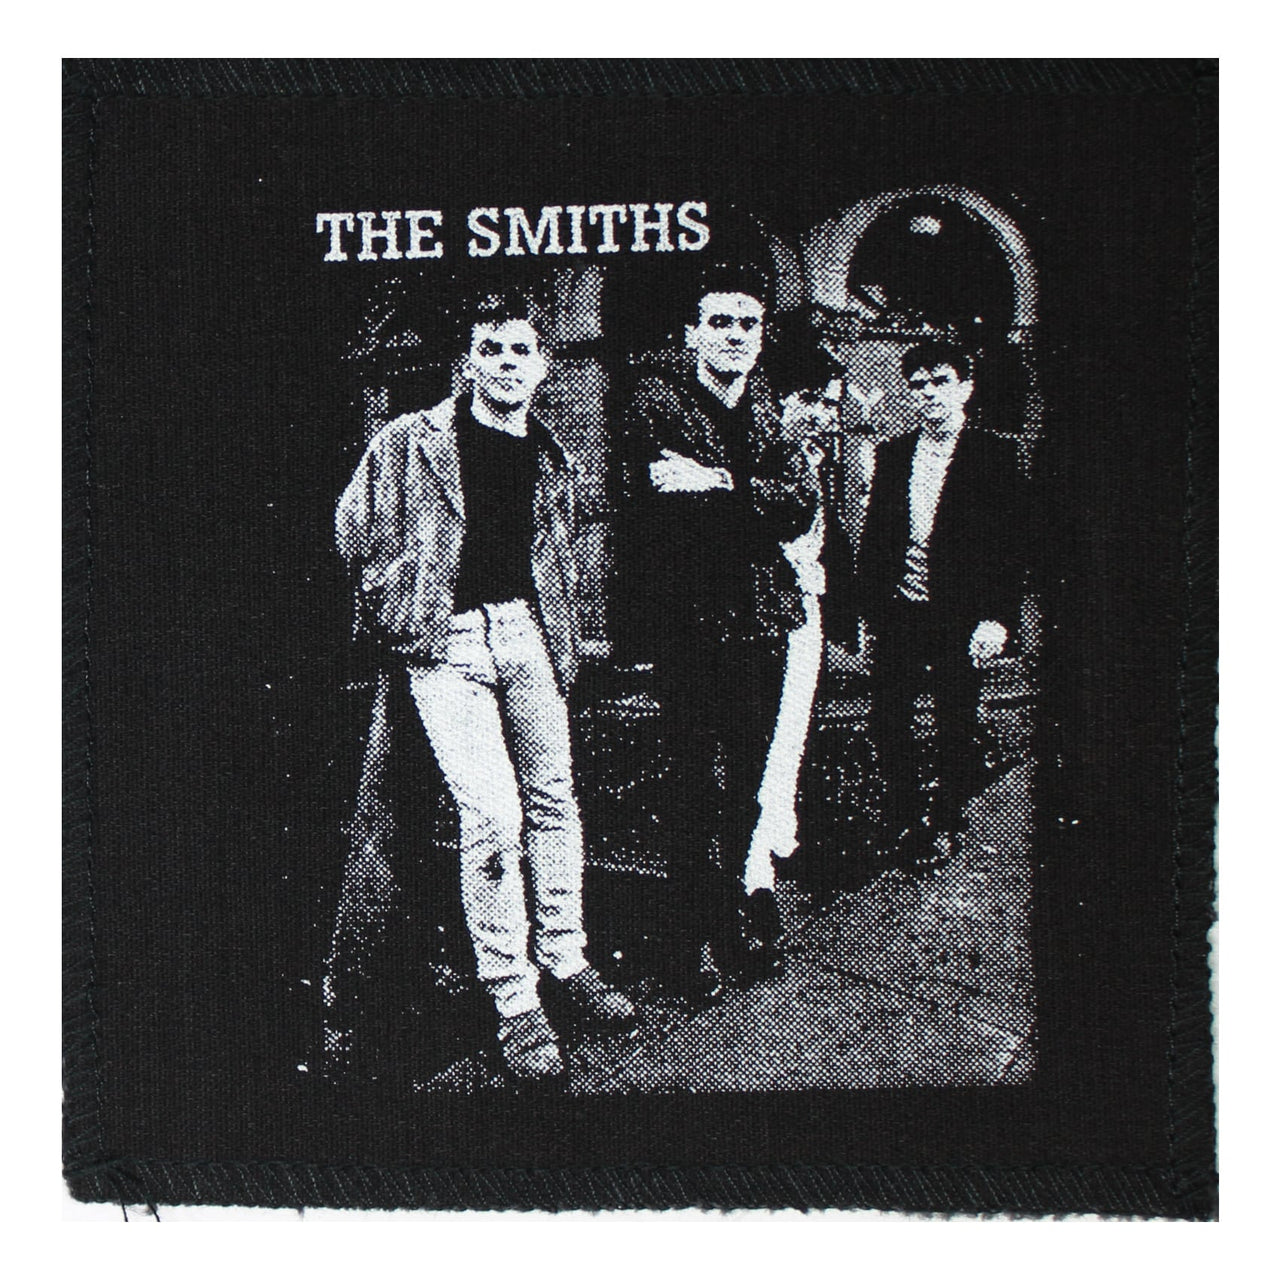 The Smiths Band Photo Cloth Patch